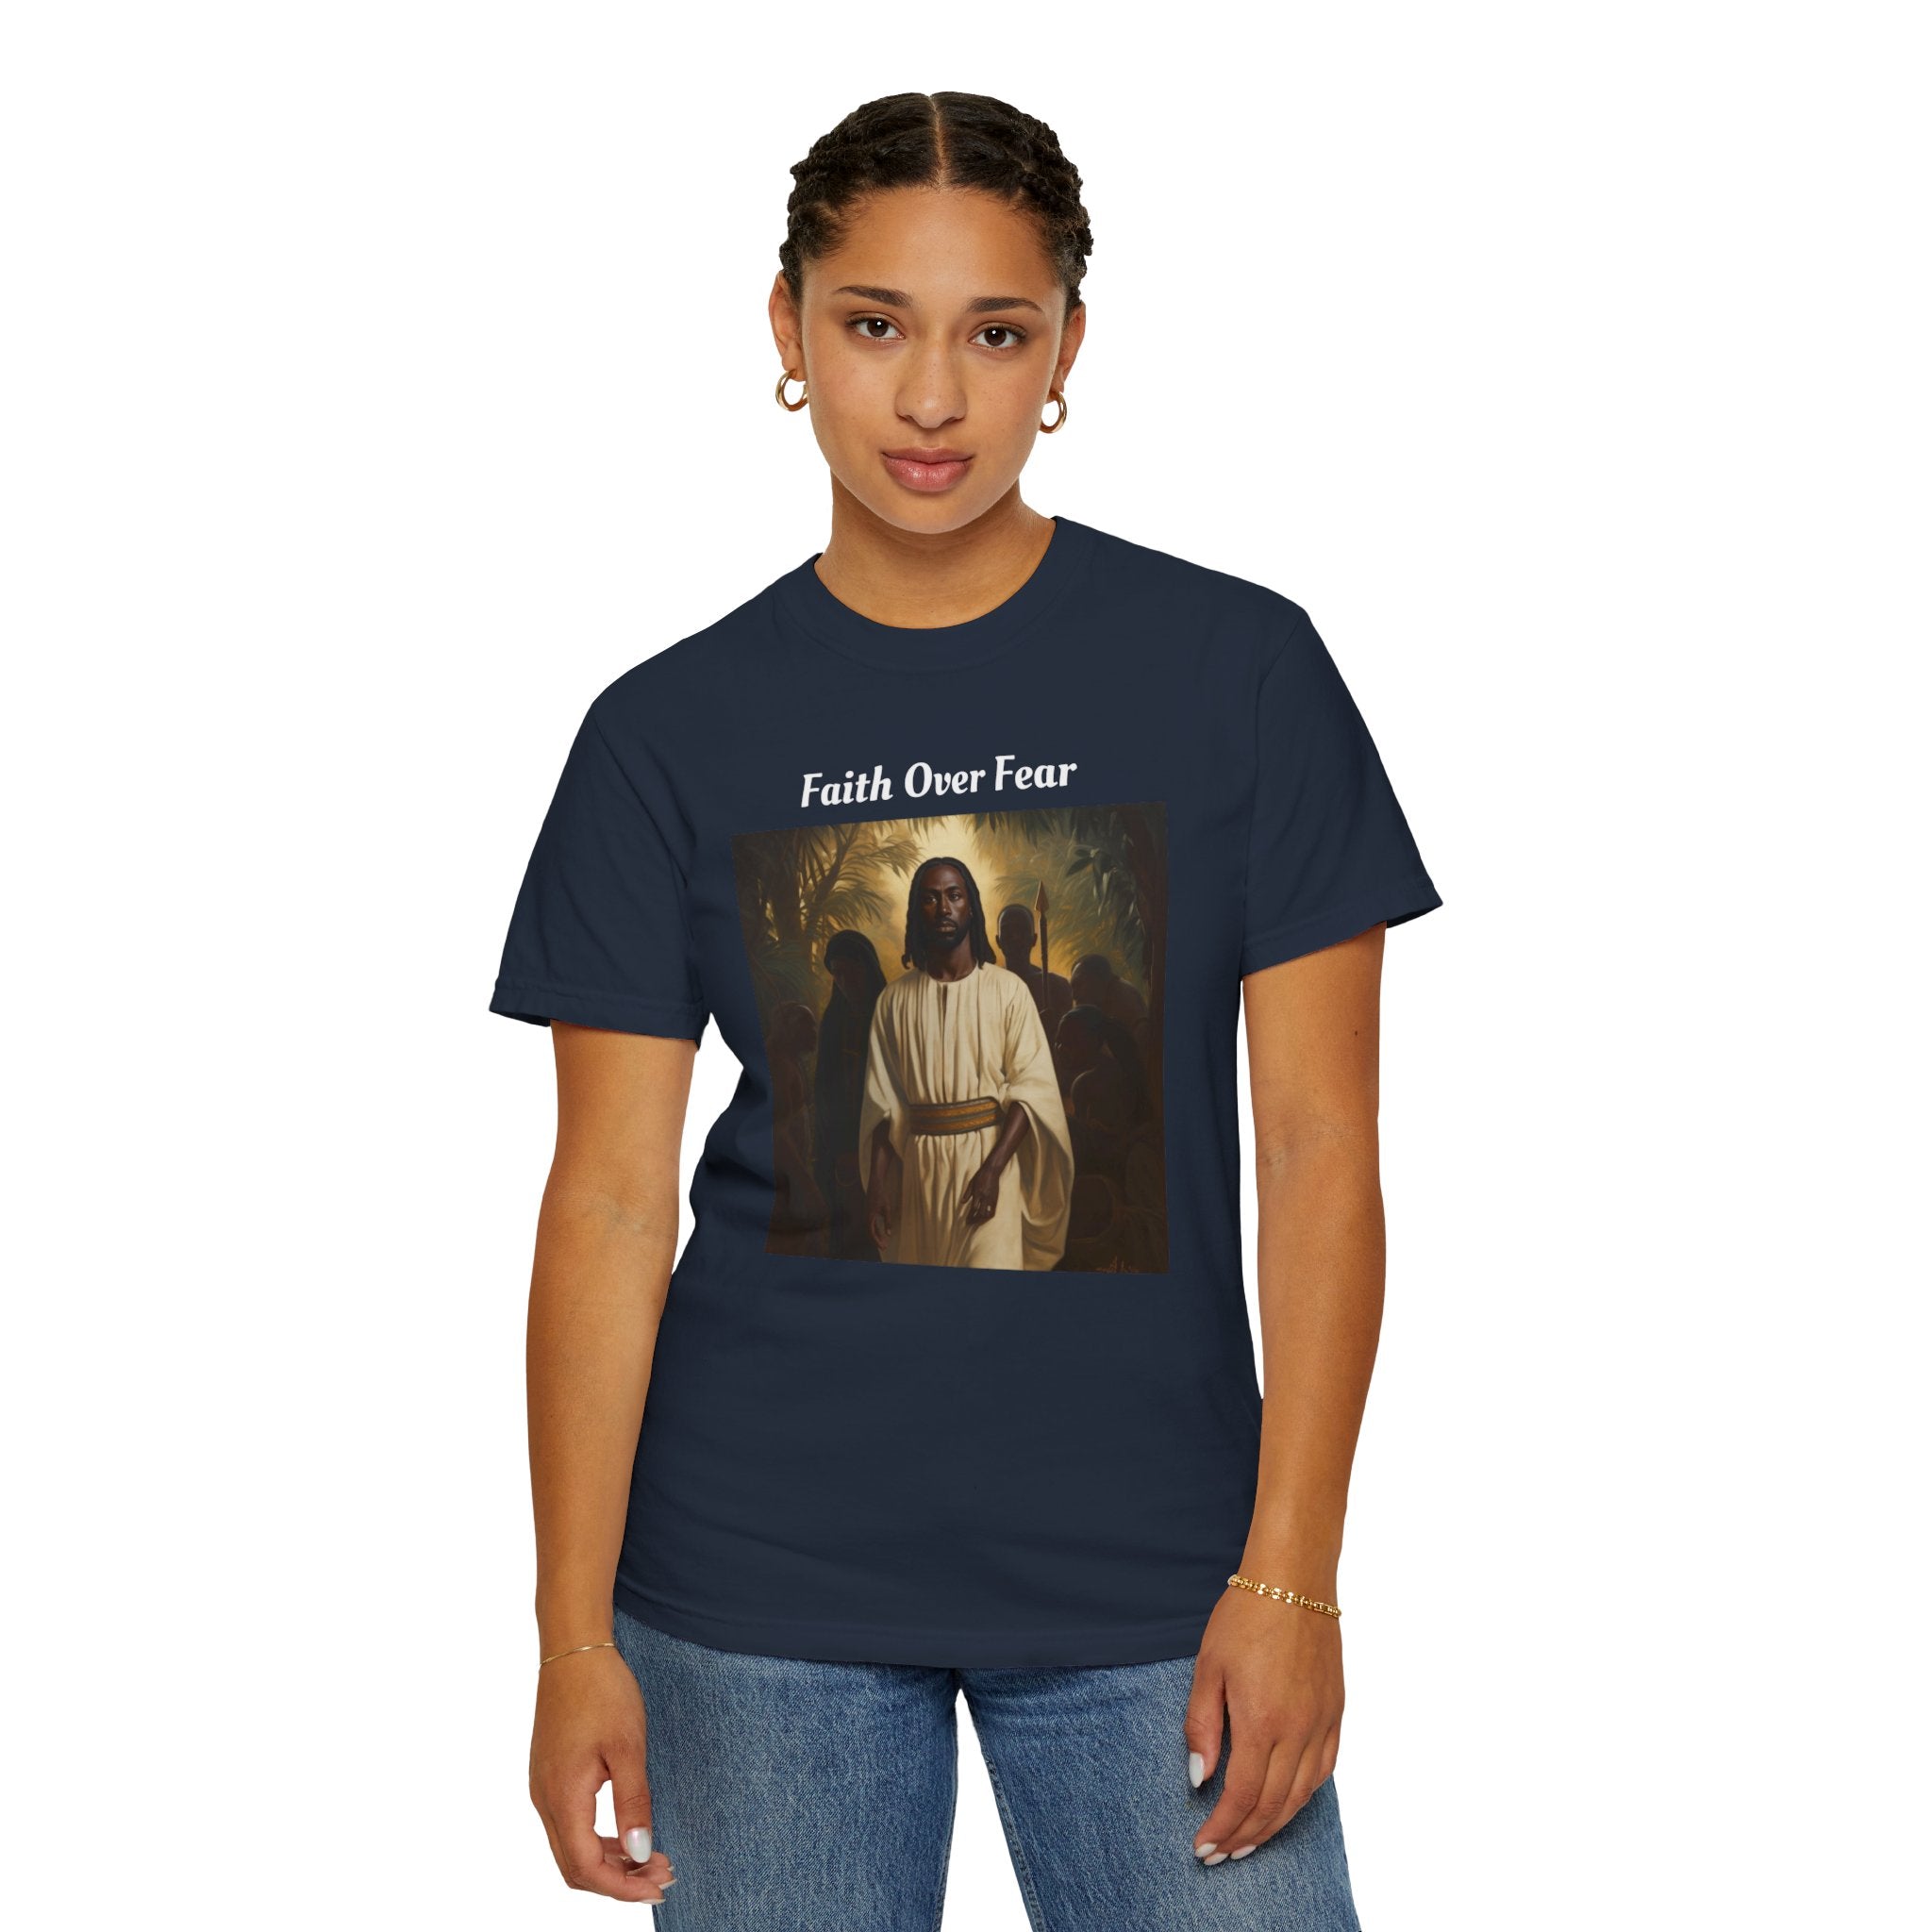 "Faith Over Fear" Unisex Garment-Dyed T-shirt - Your Ultimate Emblem of Spiritual Strength & Style: Embrace Spiritual Gratitude with This Stylish, Faith-Inspired Comfort Wear Gift